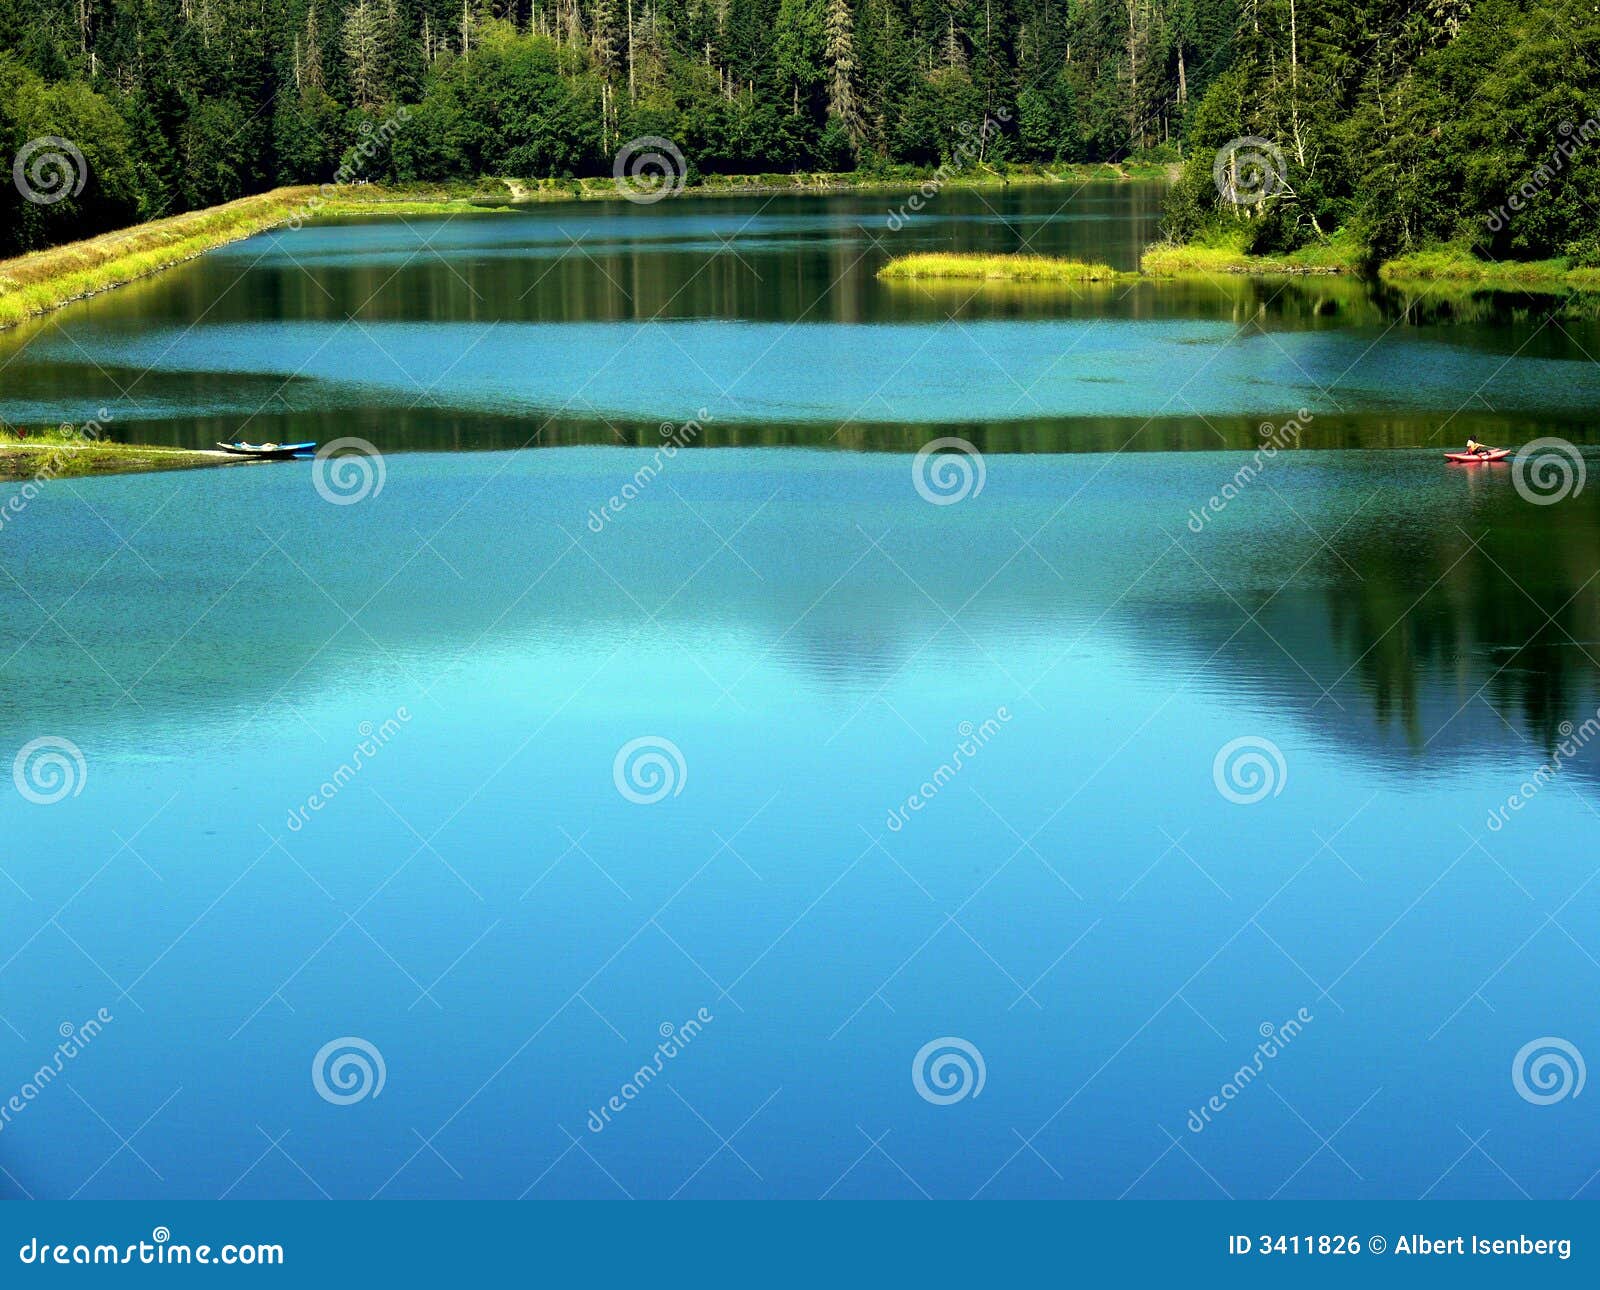 Blue Pond stock photo. Image of waterscapes, boat, shore - 3411826